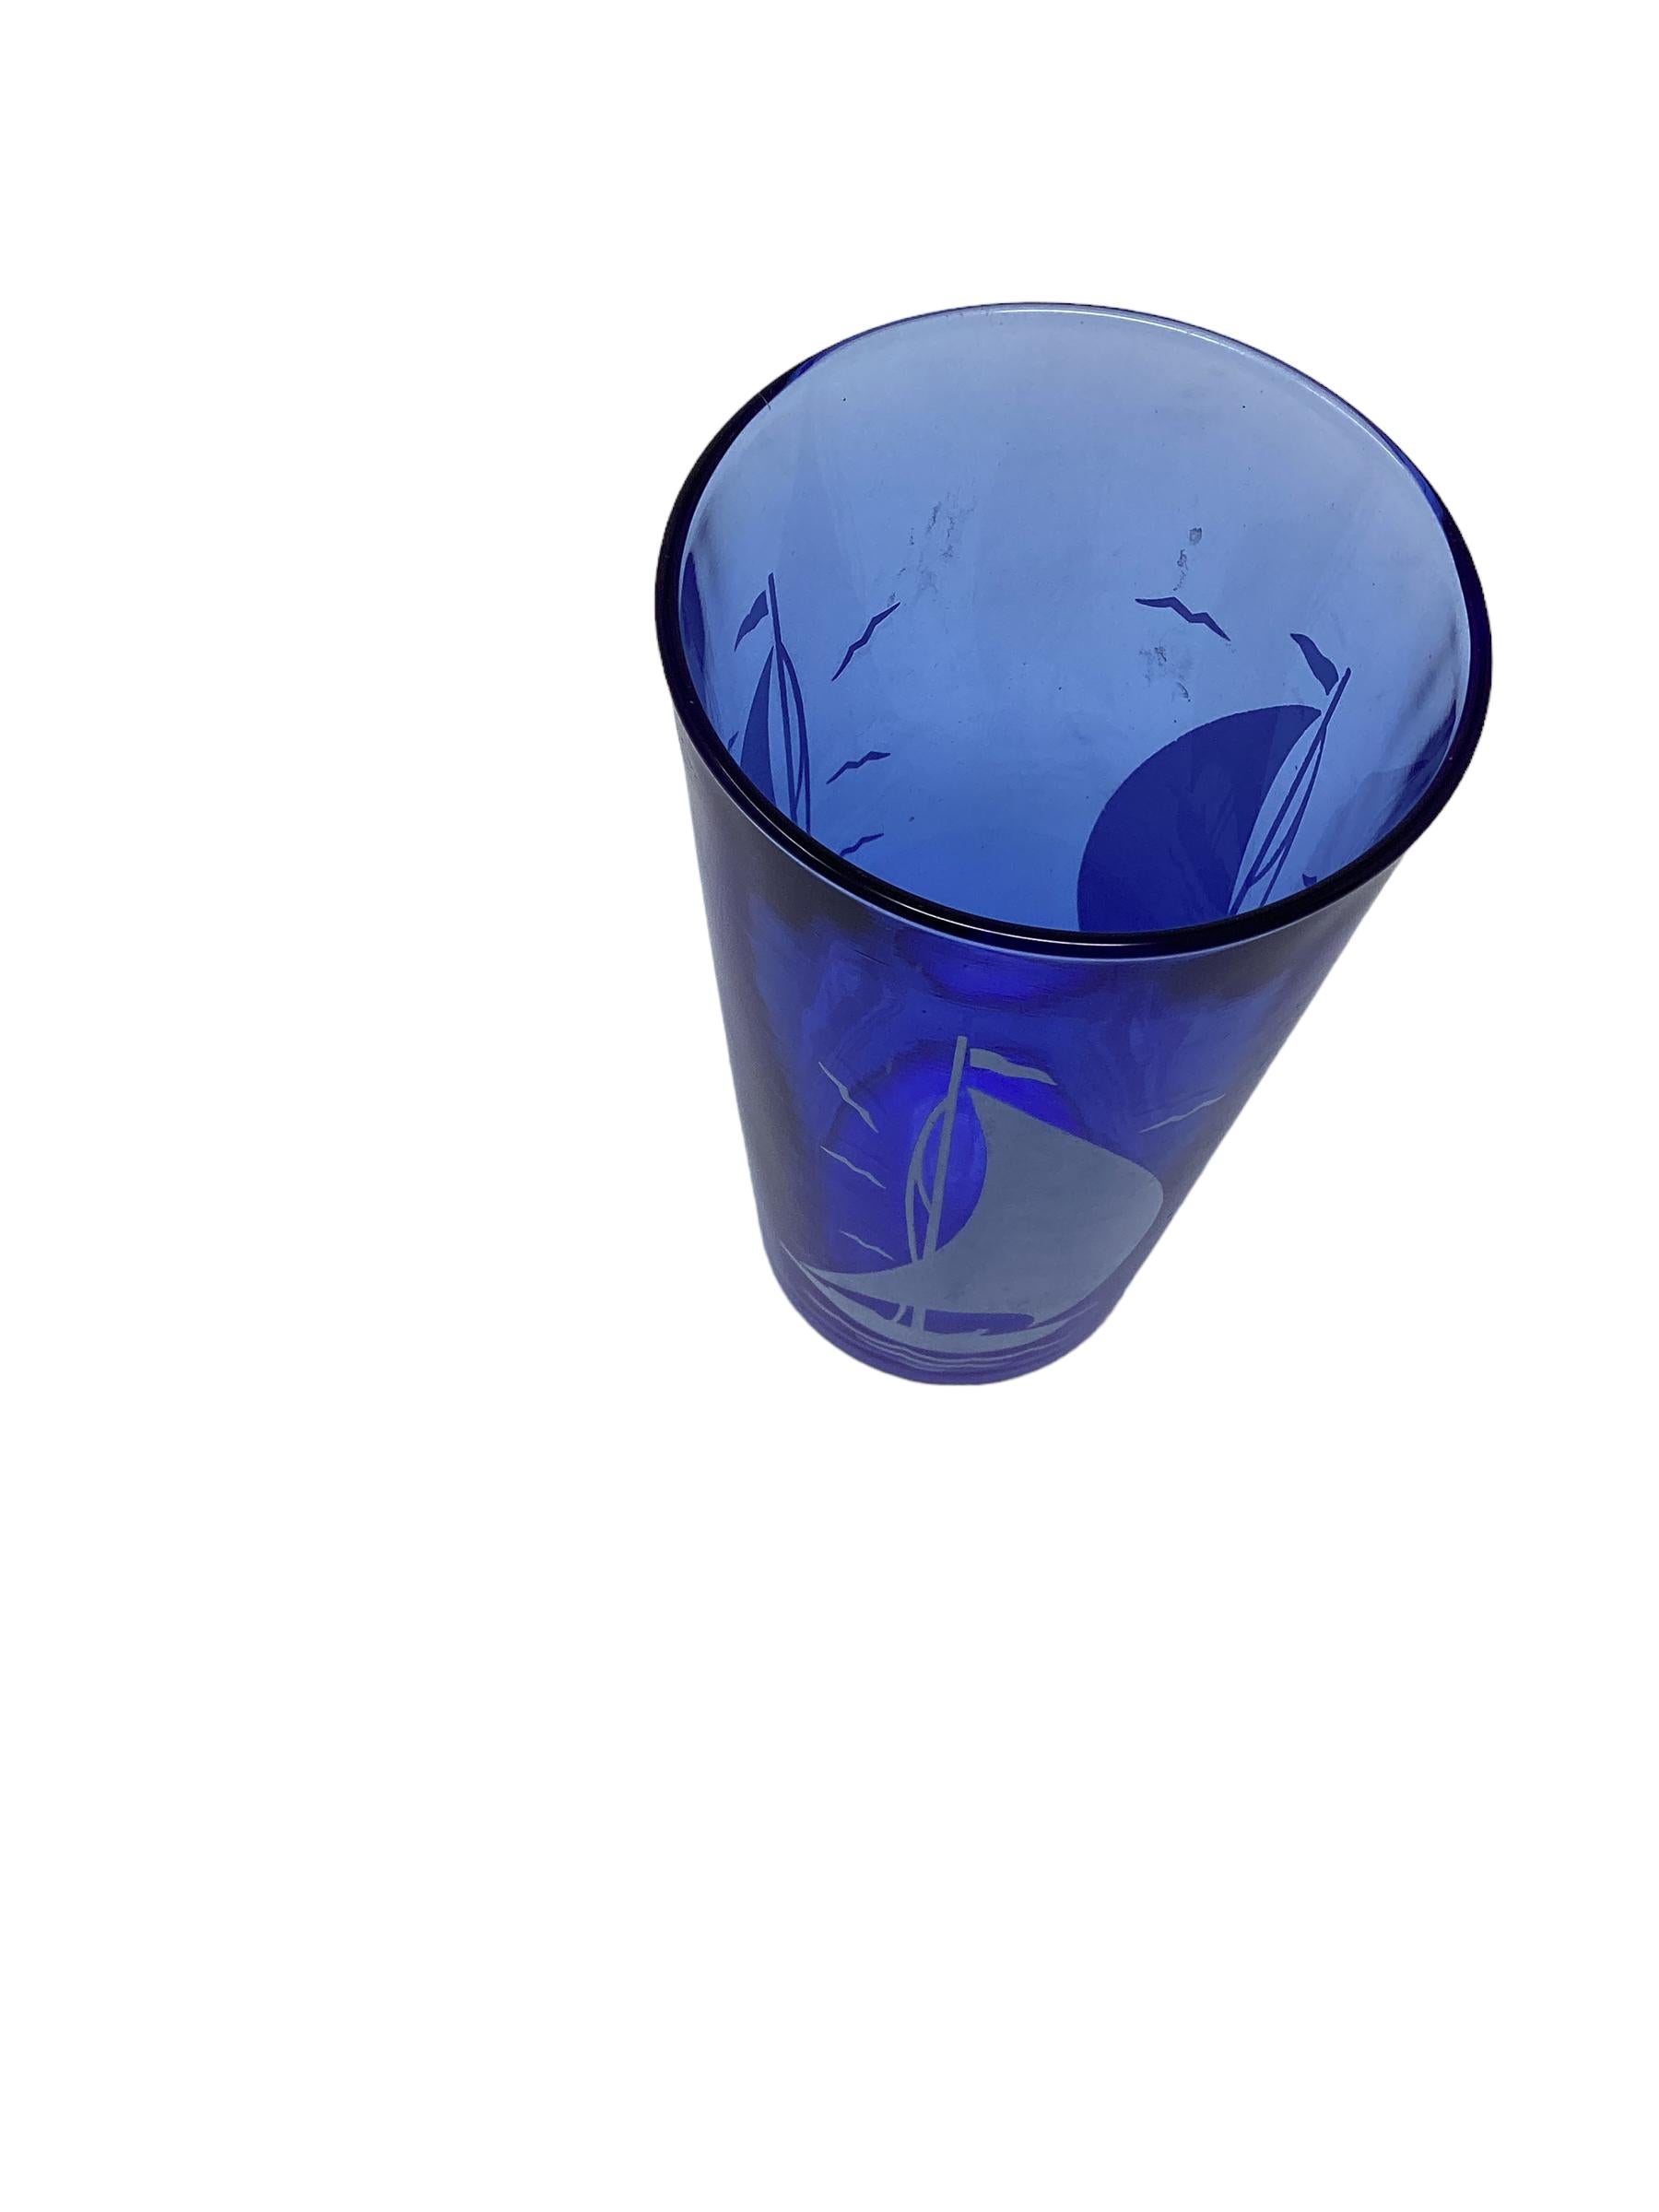 Hazel Atlas Sportsman Series Cobalt Blue with White Sailboat Tumblers. This was one Hazel-Atlas most popular designs in their Sportsman Series, which also had show dogs. We have a few sets available including pitchers, cups and ice buckets.